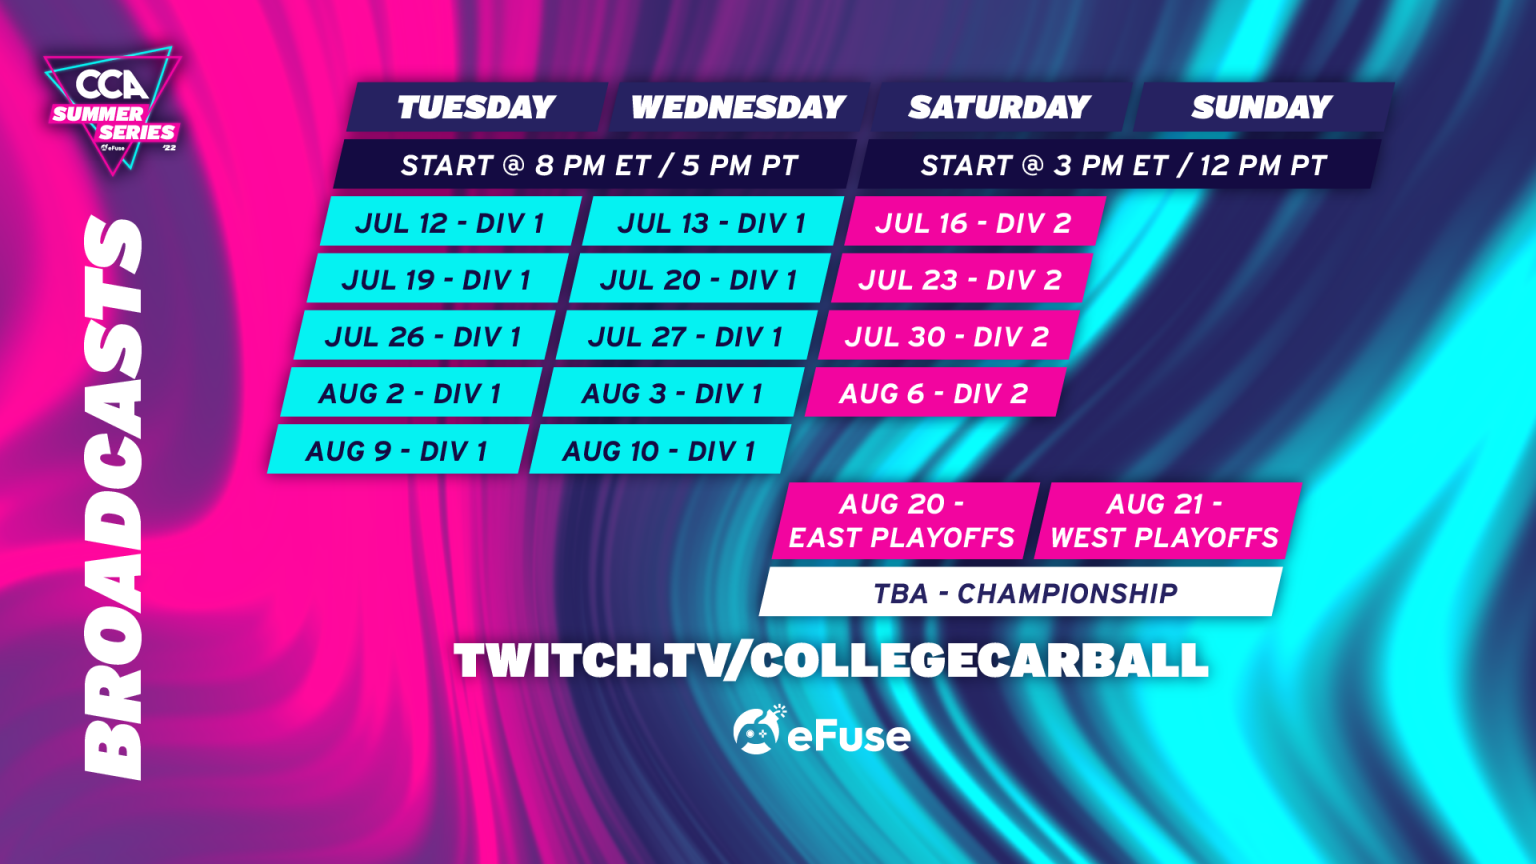 Summer Series League Play is here! • College Carball Association